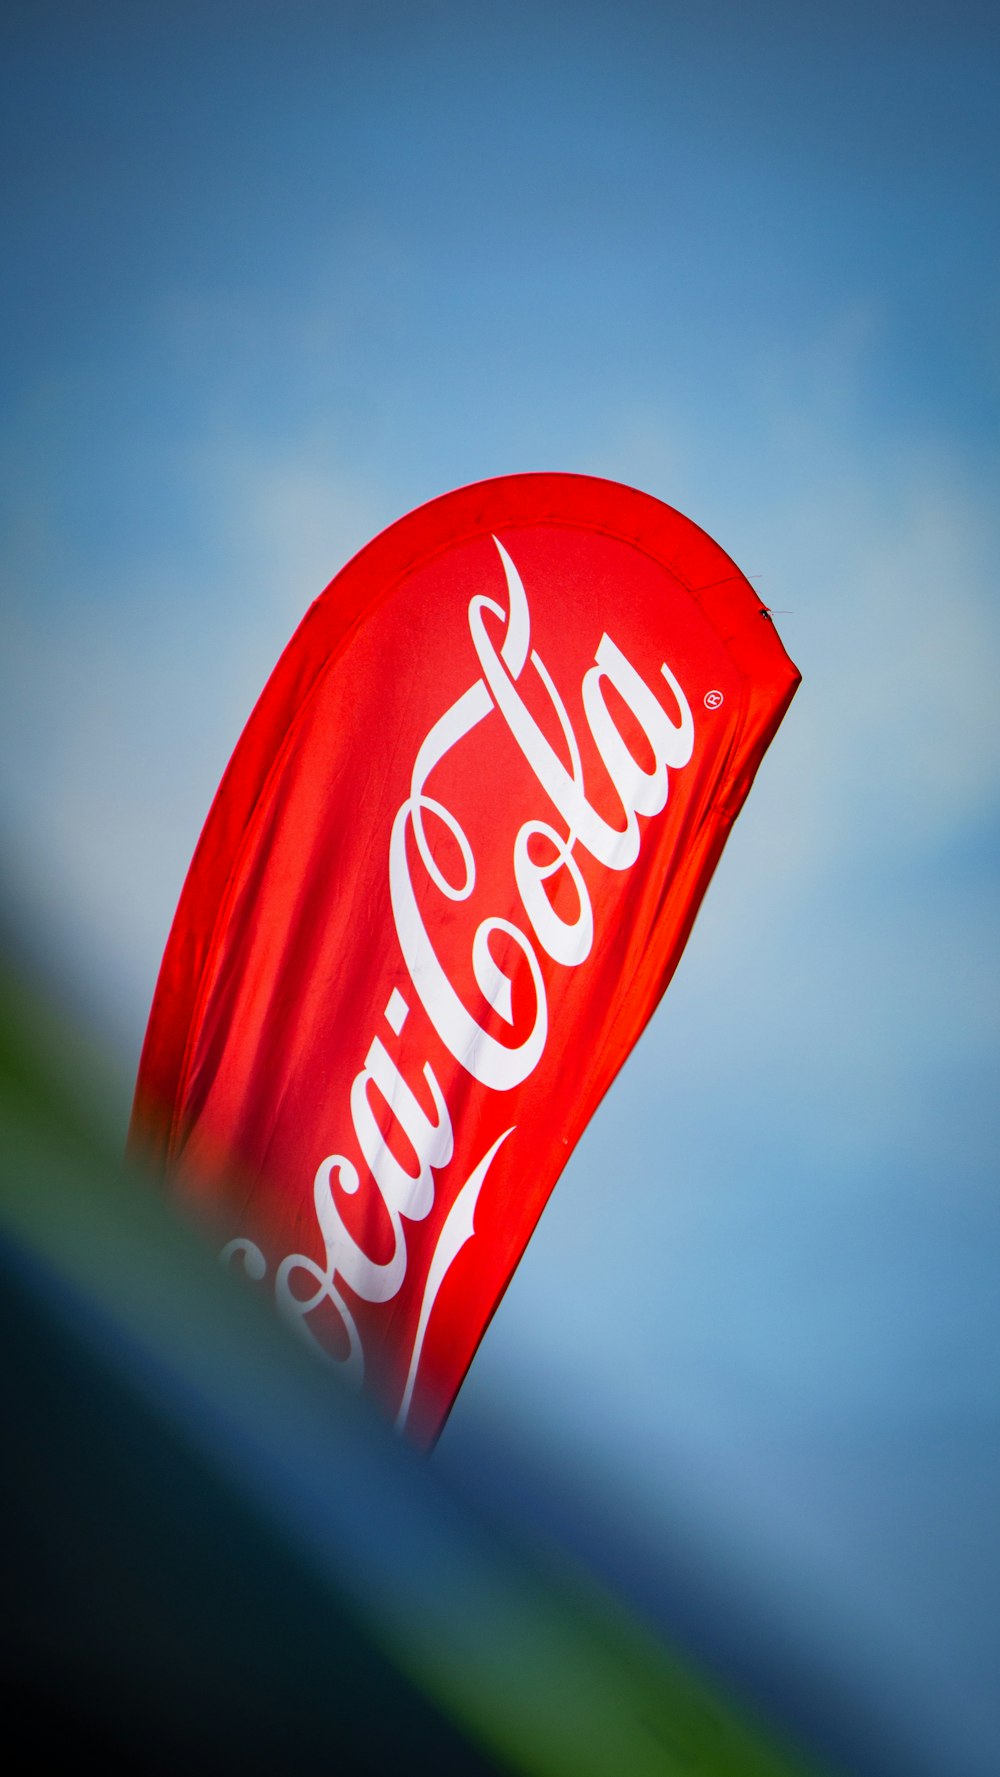 a coca - cola kite is flying in the sky